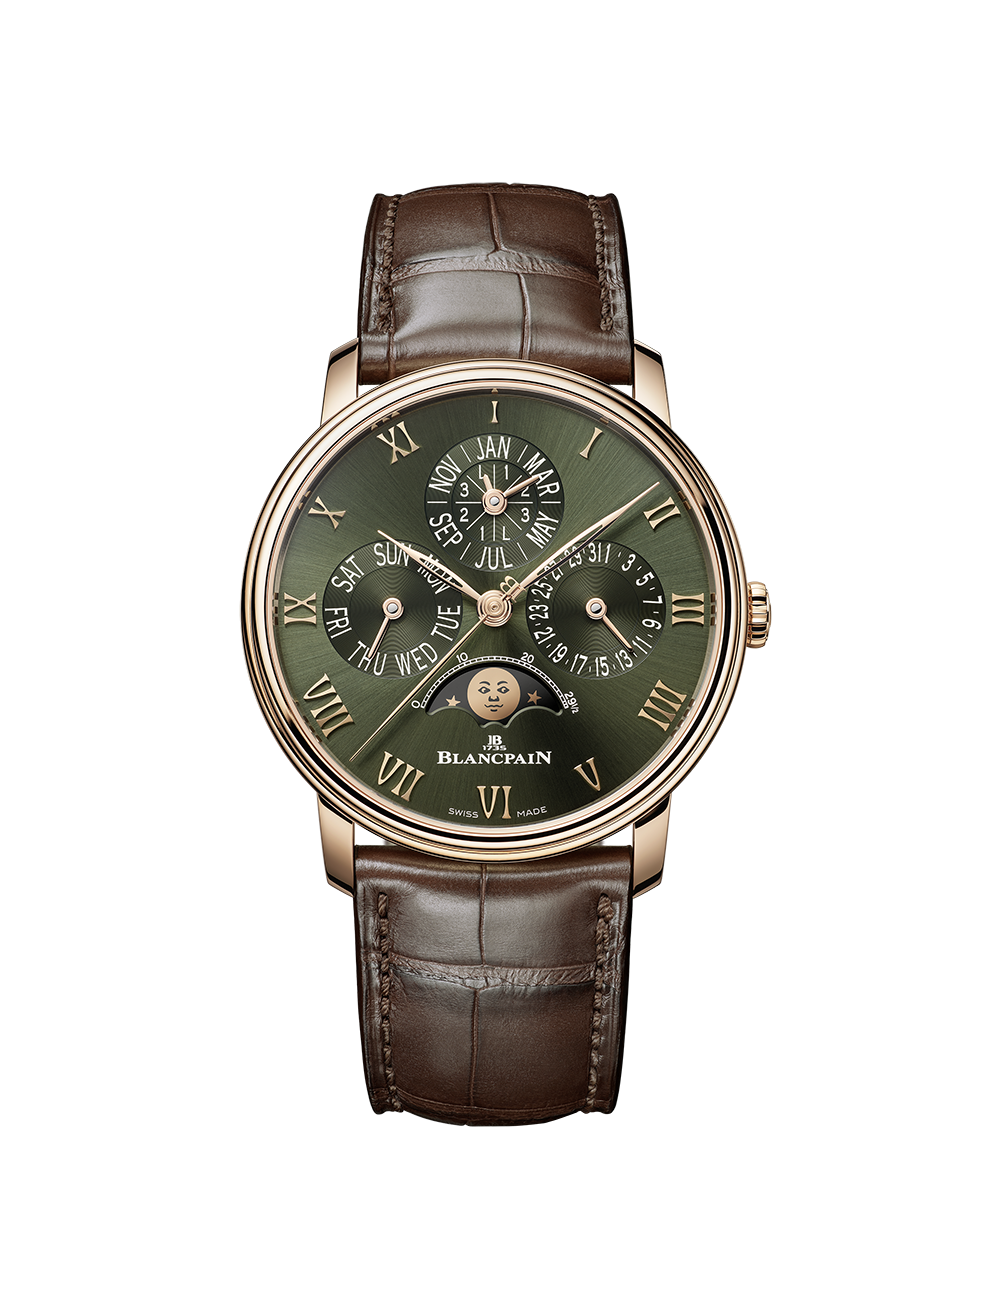 Green Like a Swiss Forest: Blancpain Drops a New Variant of its Villeret Perpetual Calendar